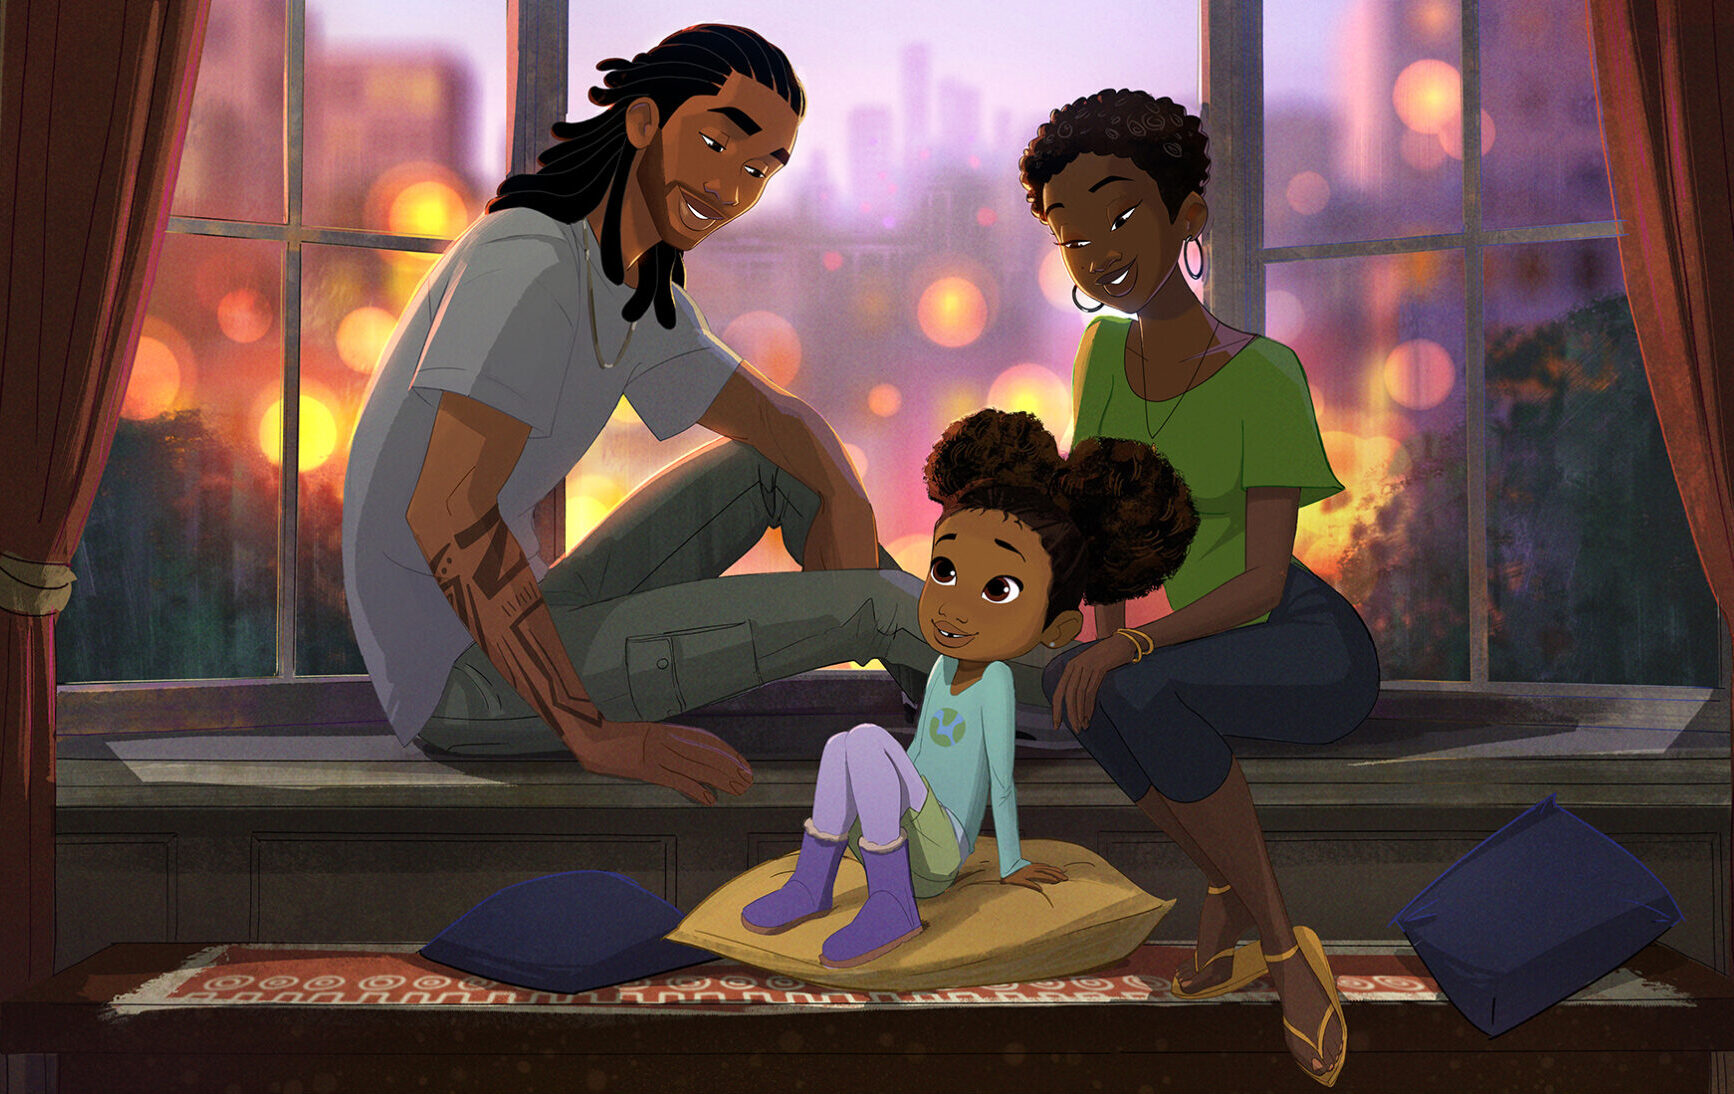 Animated Series Starring Issa Rae Shares Debut Episode Teaser